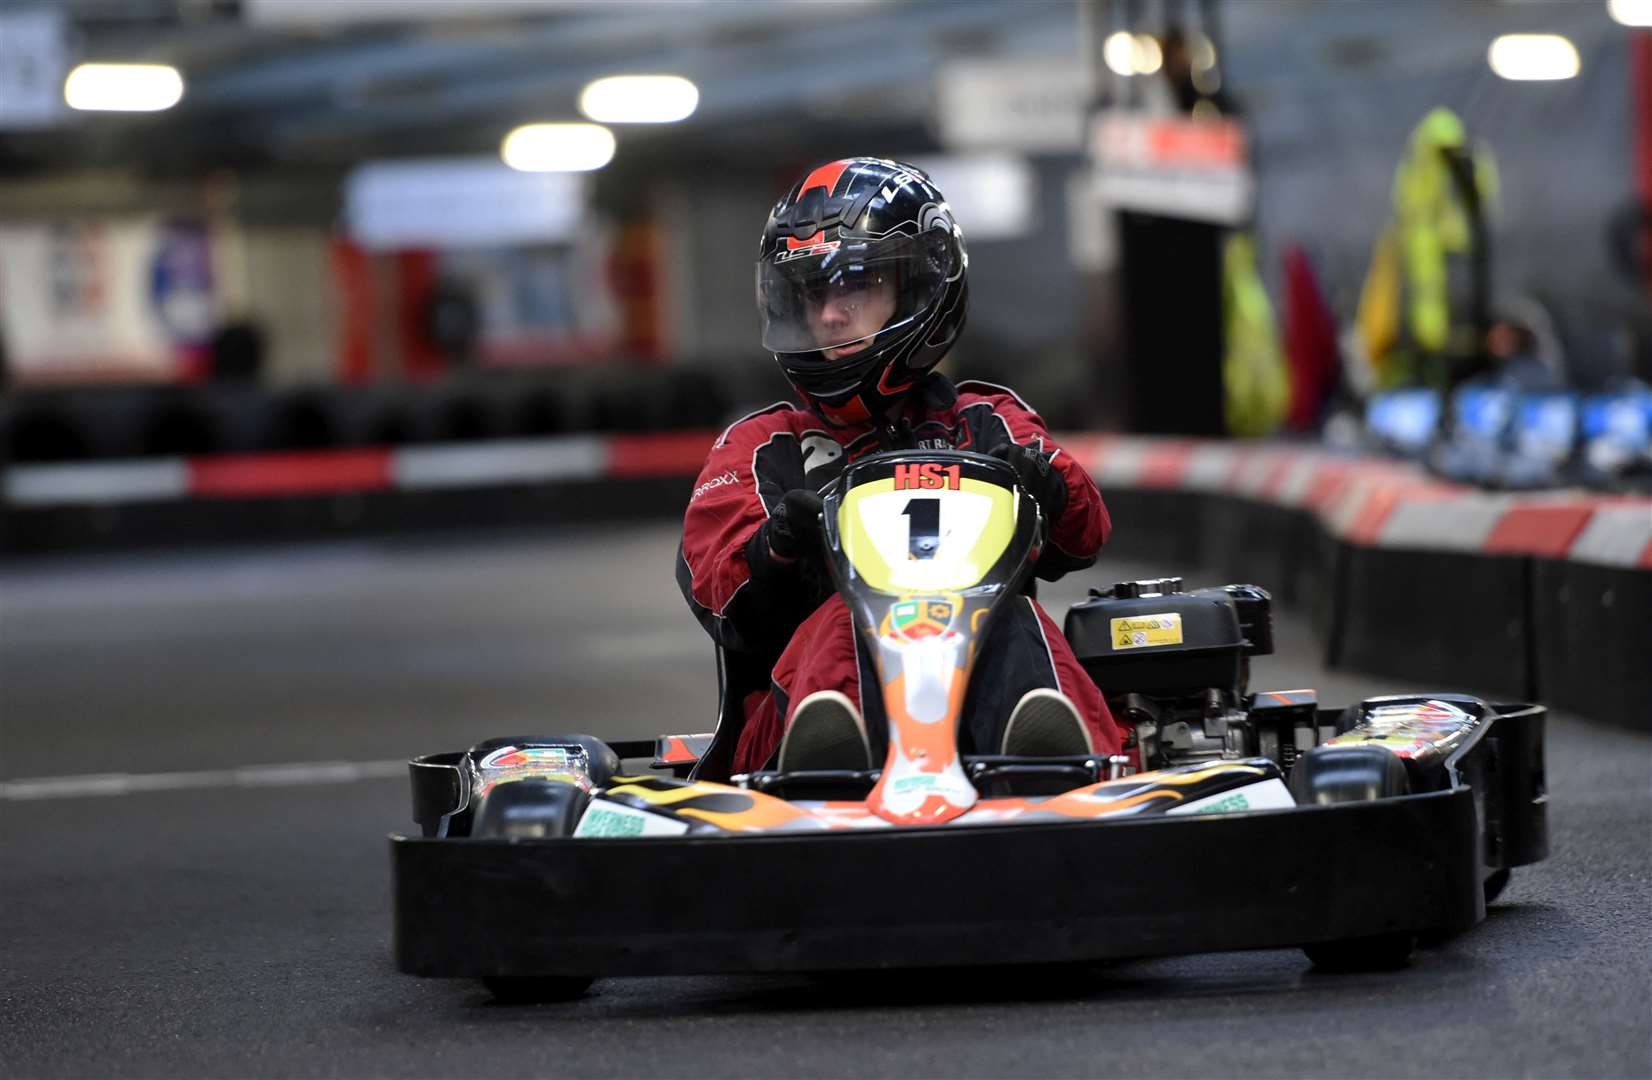 Inverness Kart Raceway has a range of options for young speed freaks.